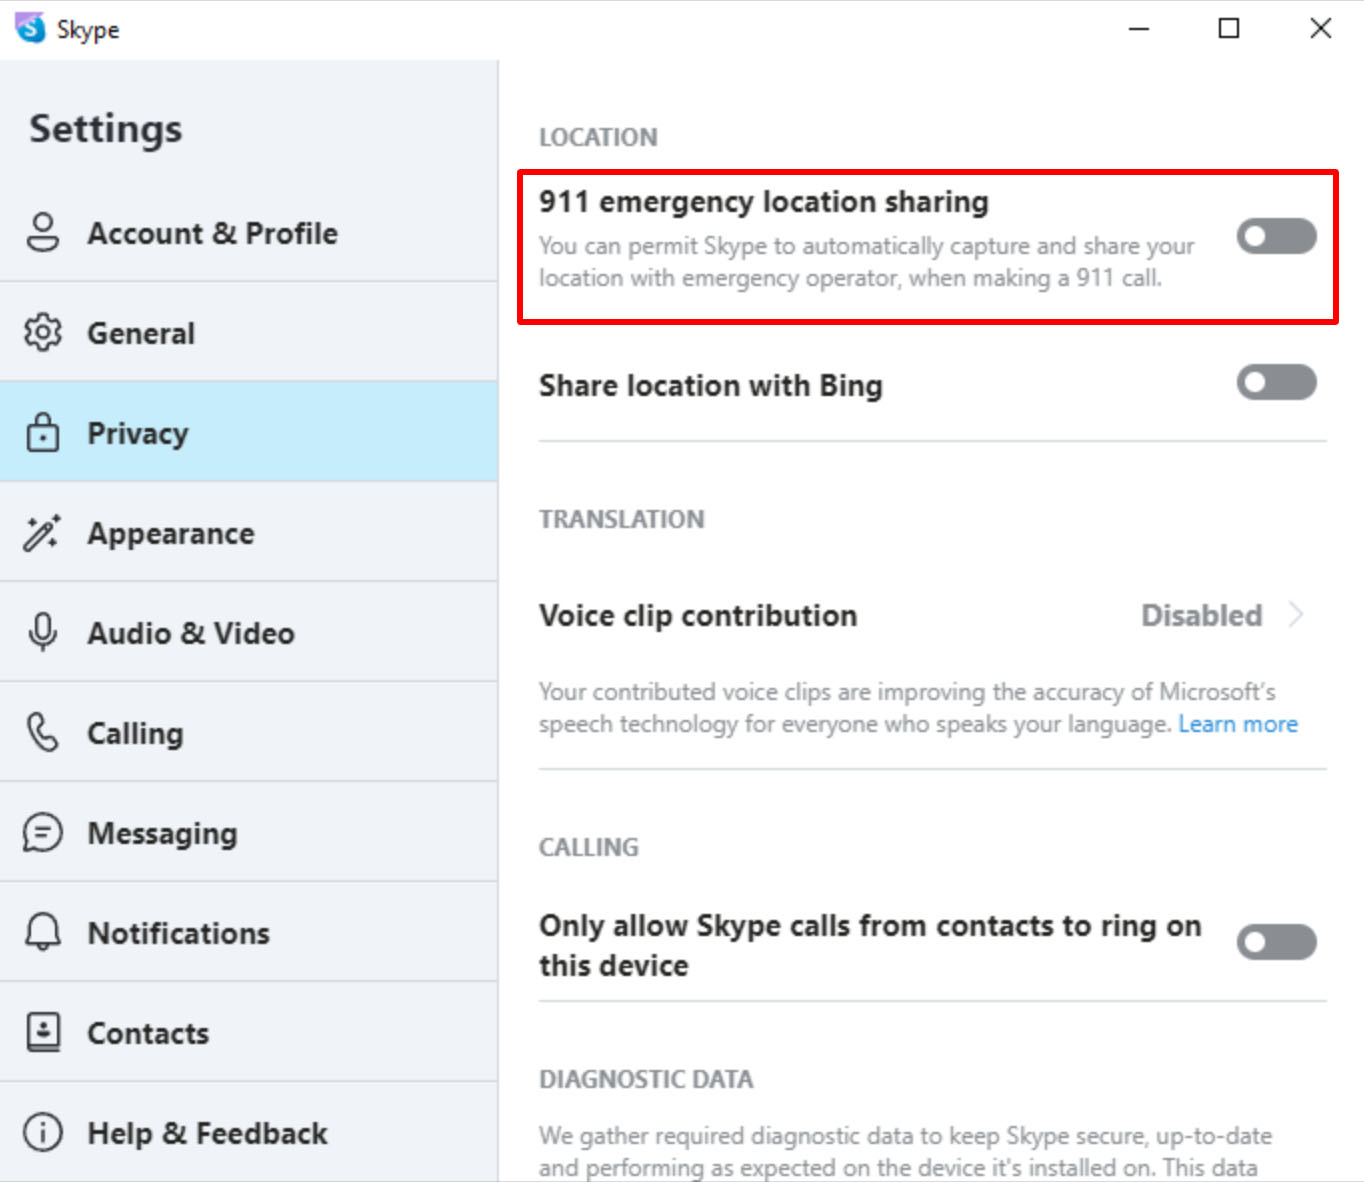 Skype interface showing privacy settings with a red box highlighting "911 emergency location sharing".